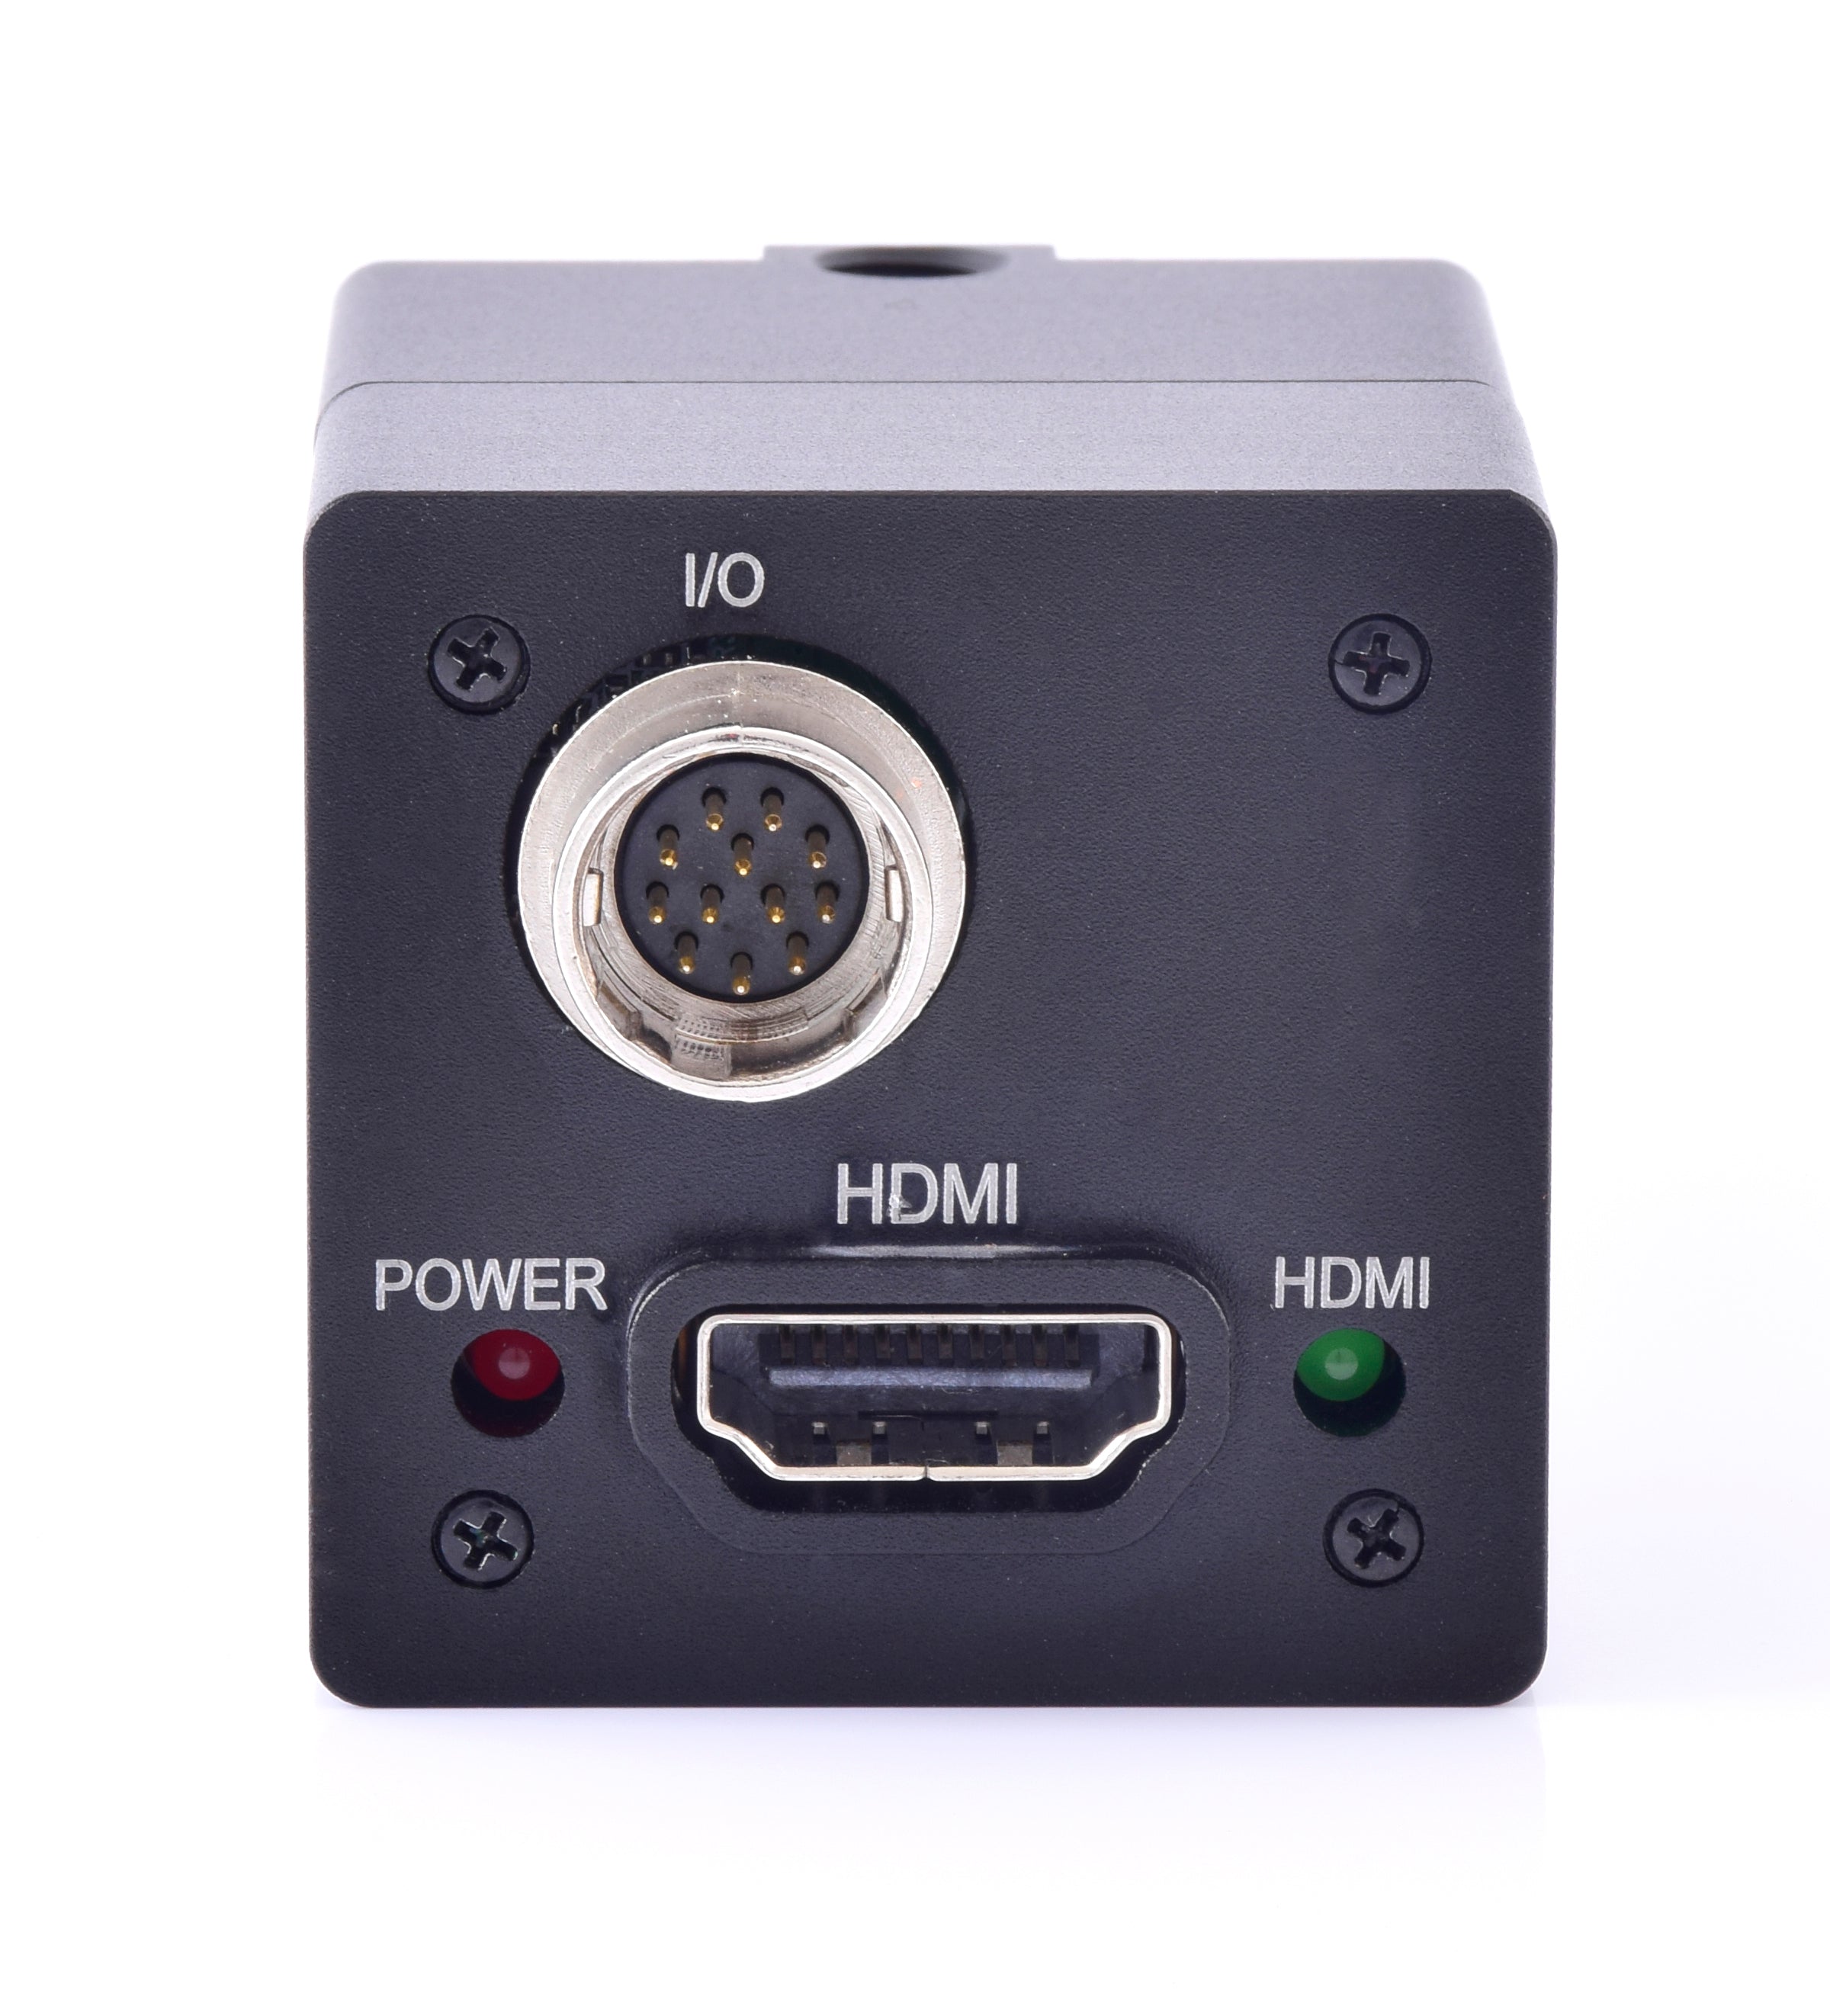 AIDA Imaging Micro UHD 4K HDMI POV Camera with TRS Stereo Audio Input in a Back View